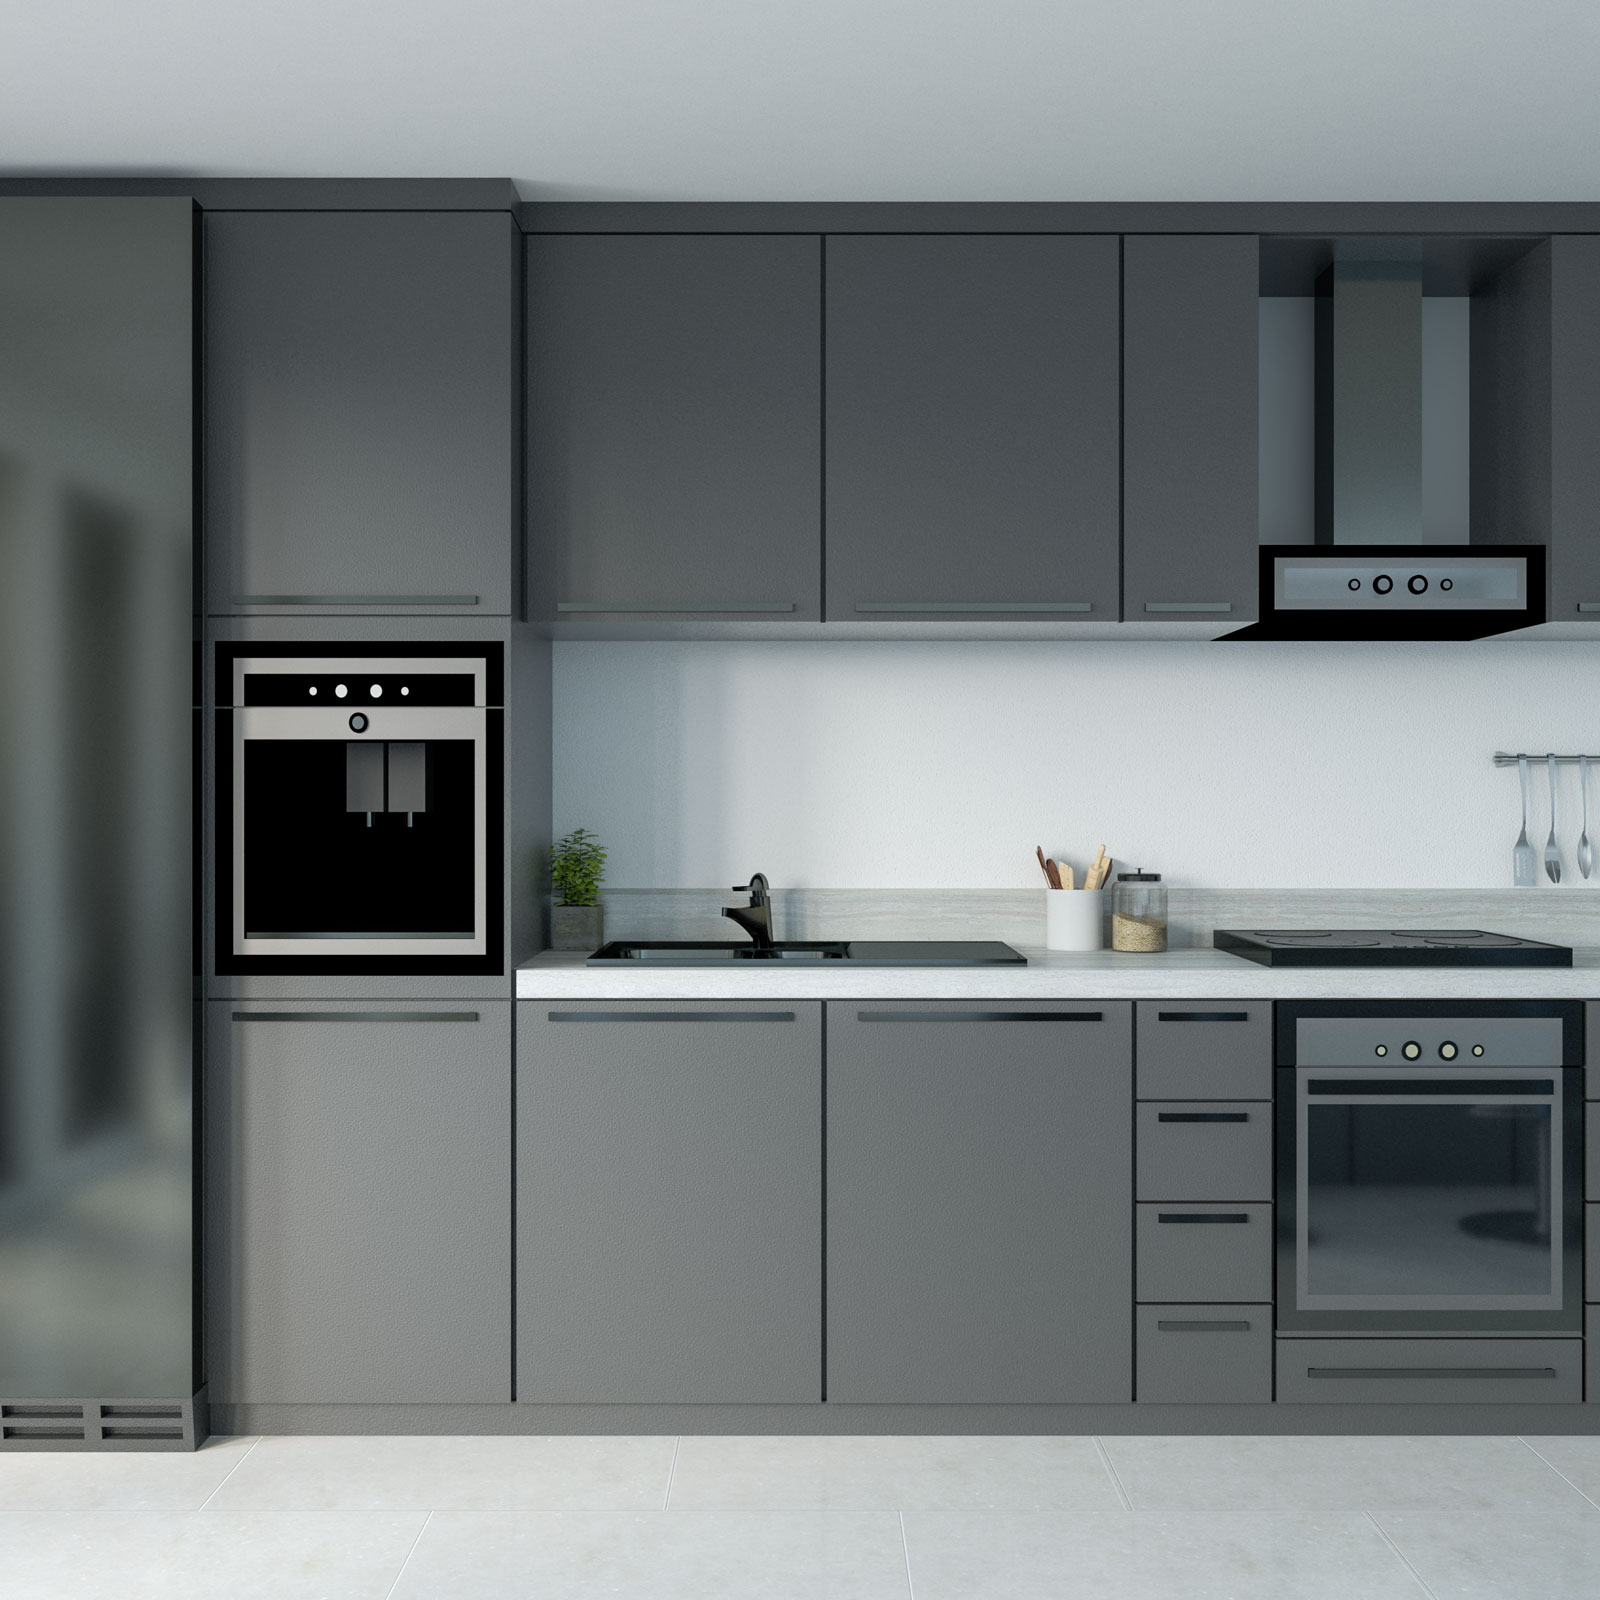 Charcoal cabinets with black kitchen appliances